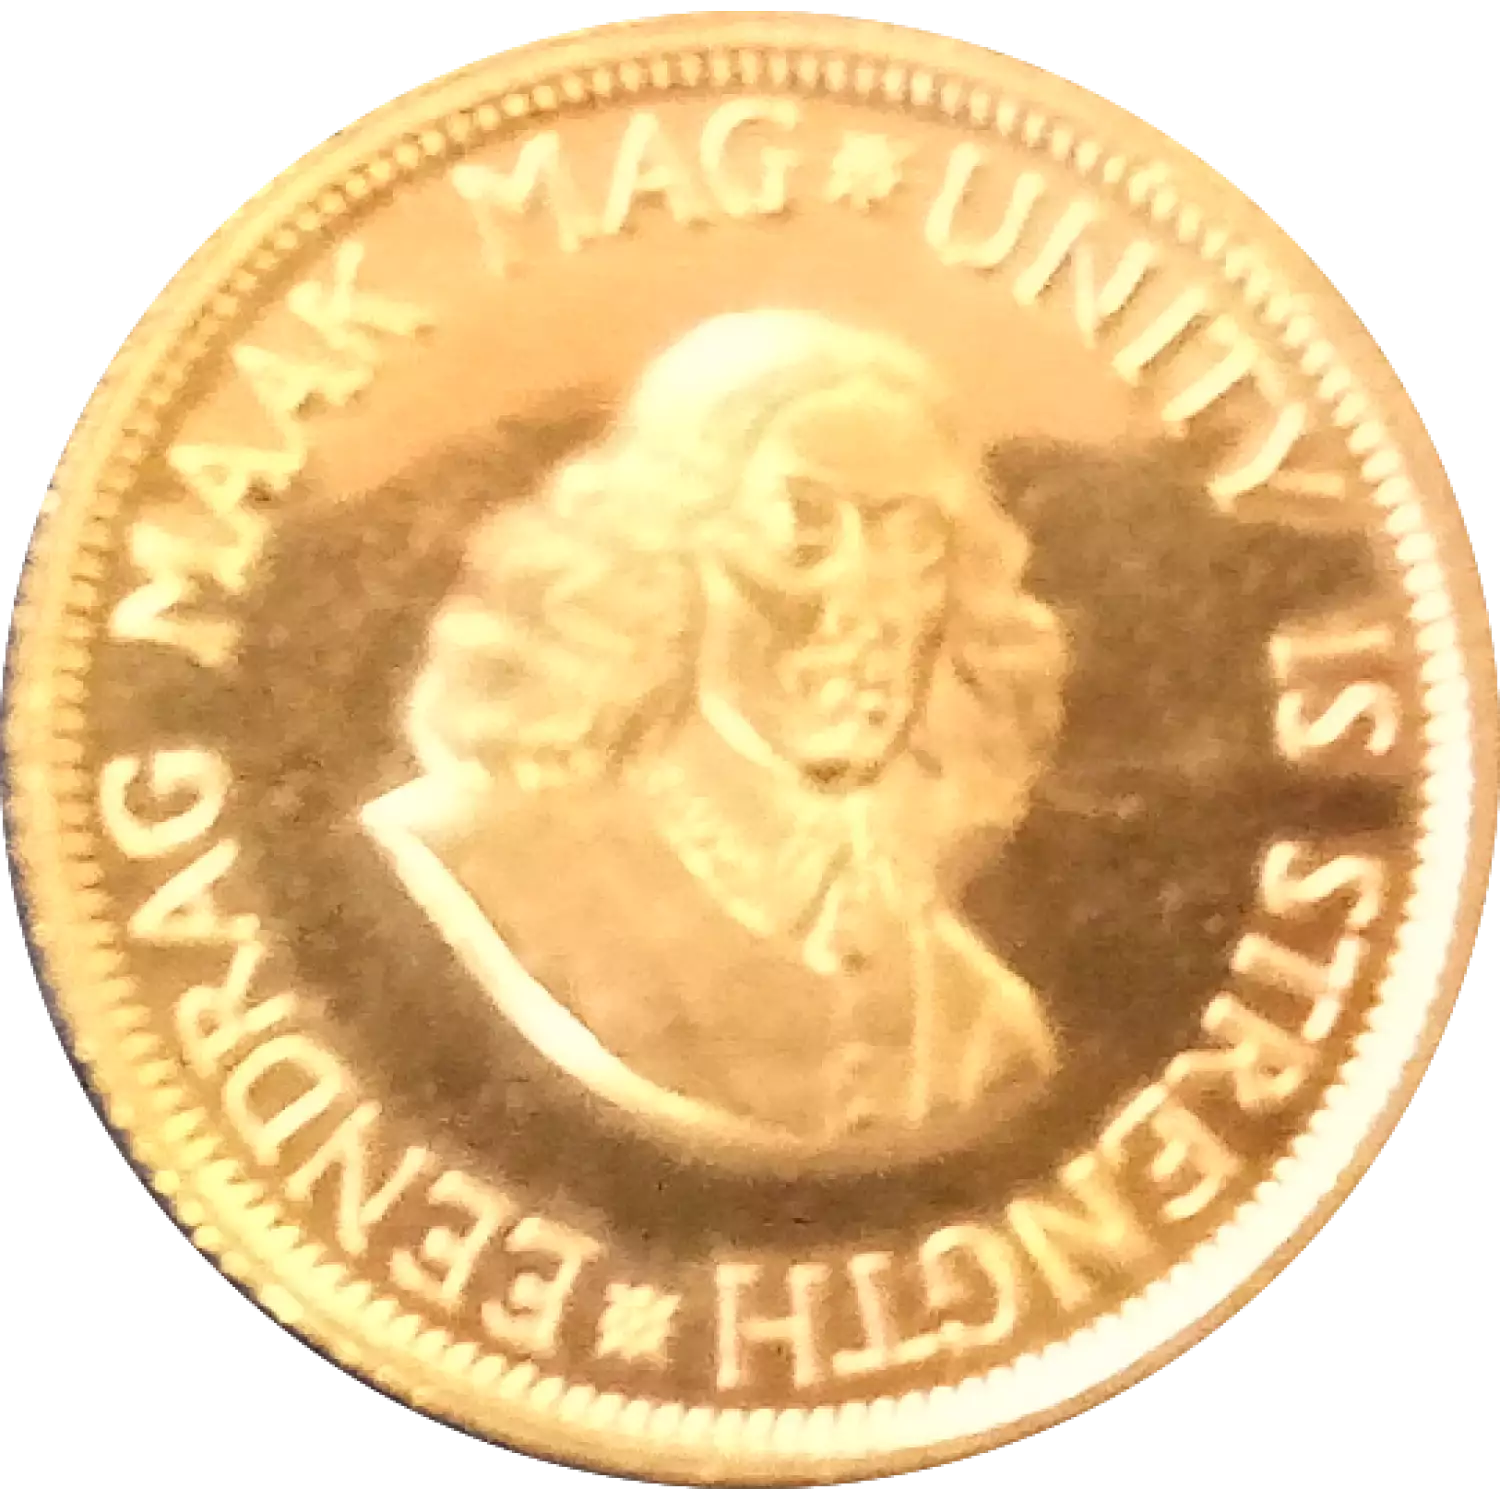 South Africa 2 Rand gold coin (3)